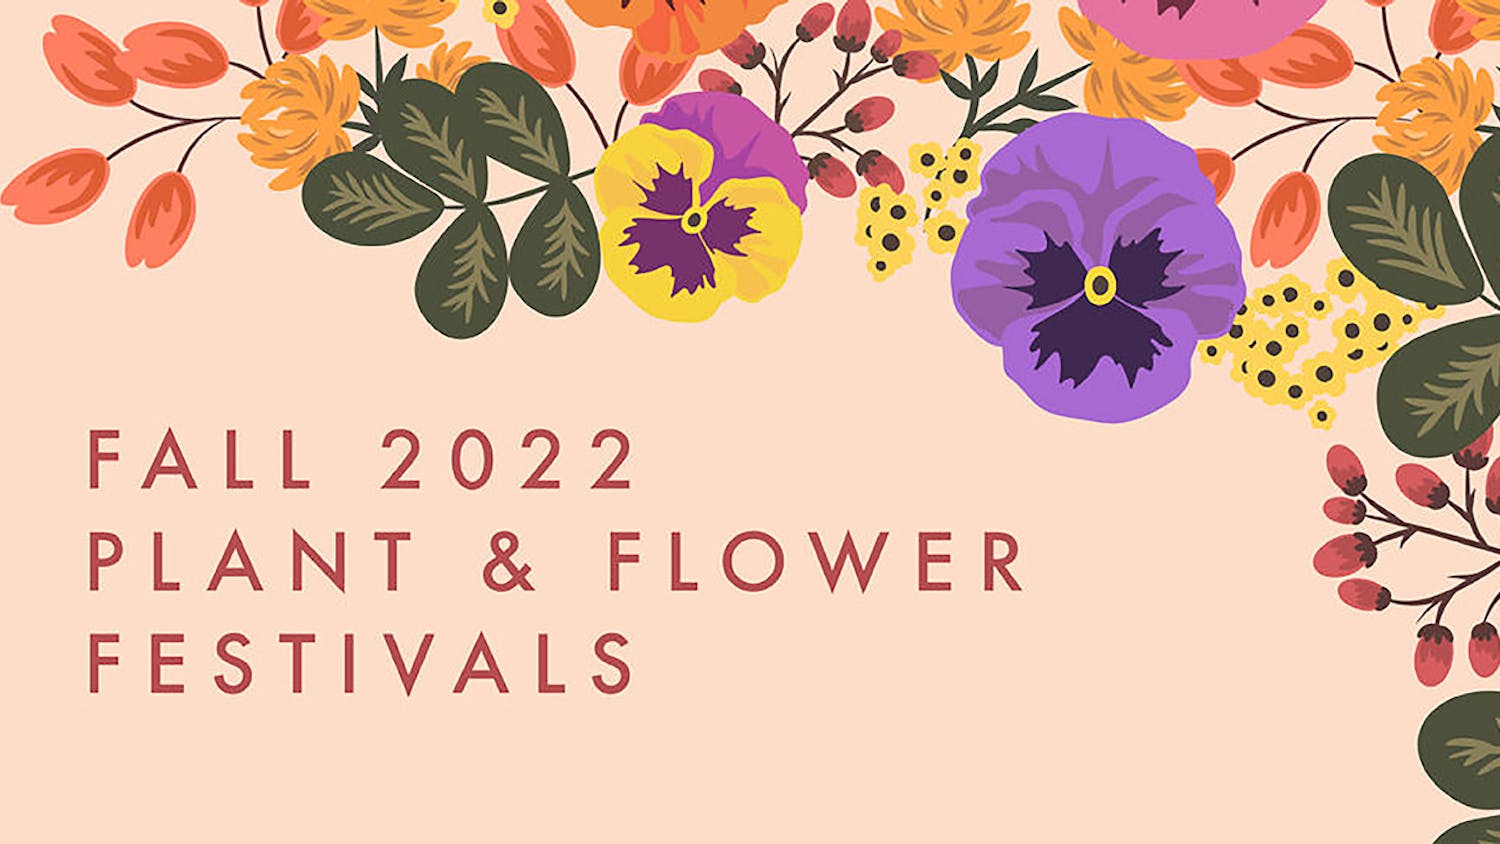 Preview graphic for the Fall 2022 Plant & Flower Festival.